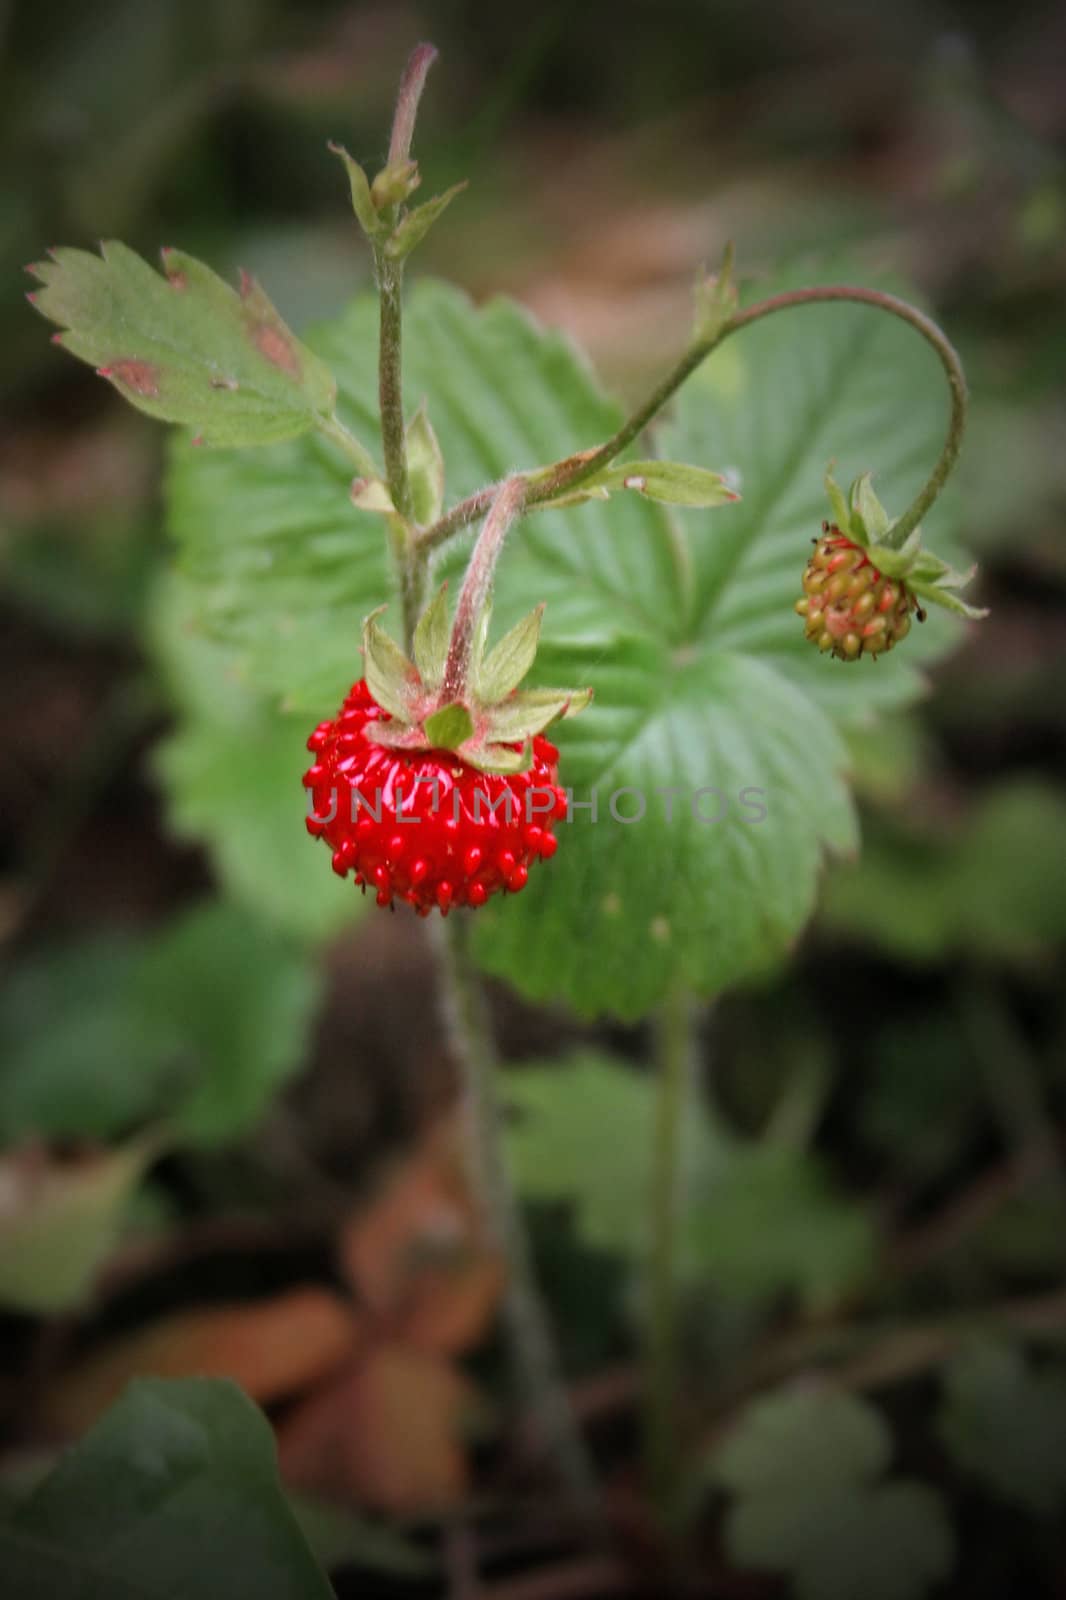 increasing timber berry - a red strawberry